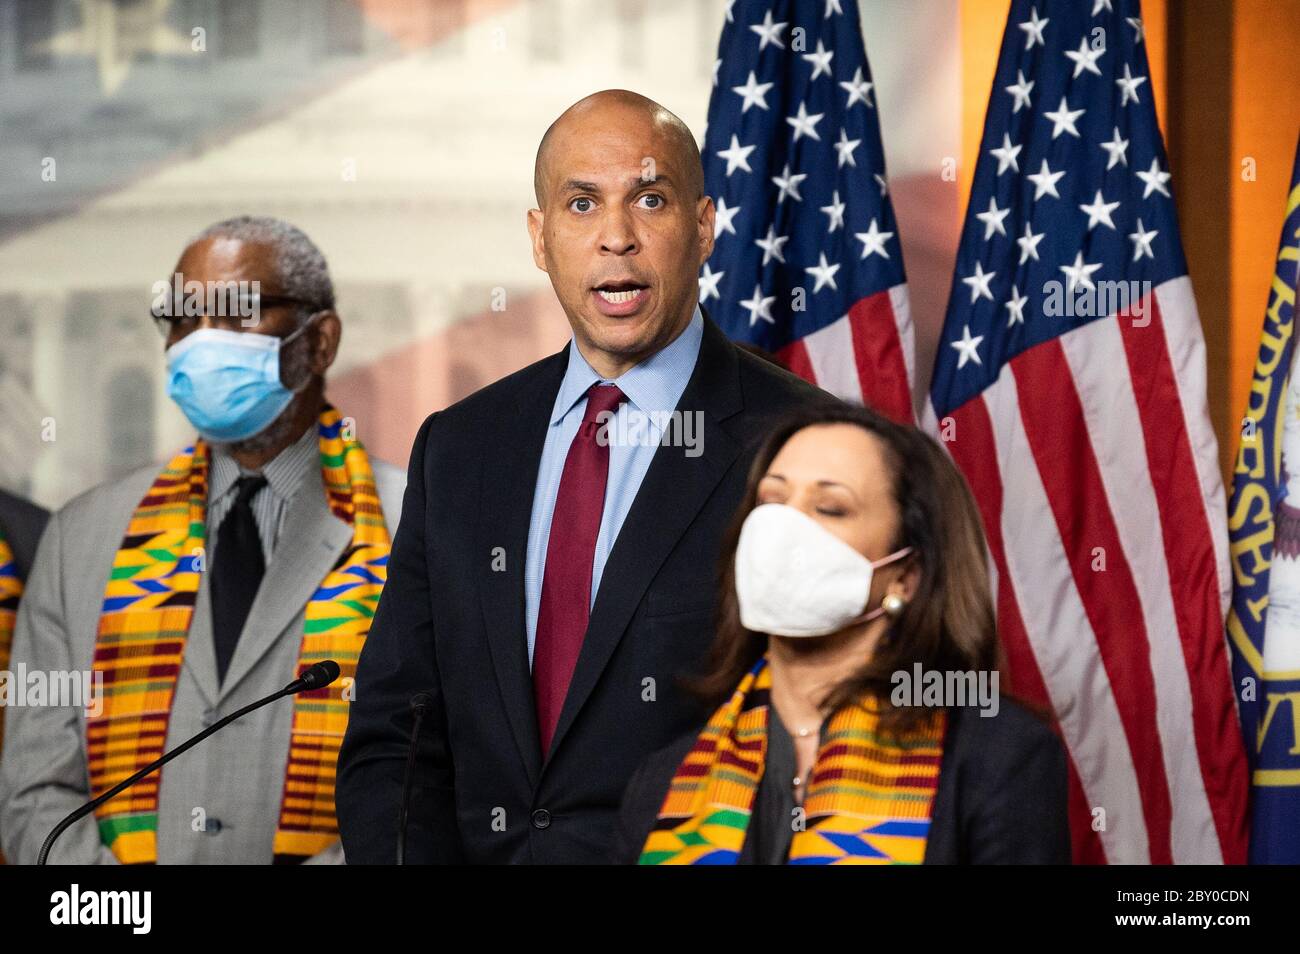 U.S. Senator Cory Booker (D-NJ) speaks during a press conference with Congressional Democrats unveiling policing reform and equal justice legislation in Washington. Stock Photo